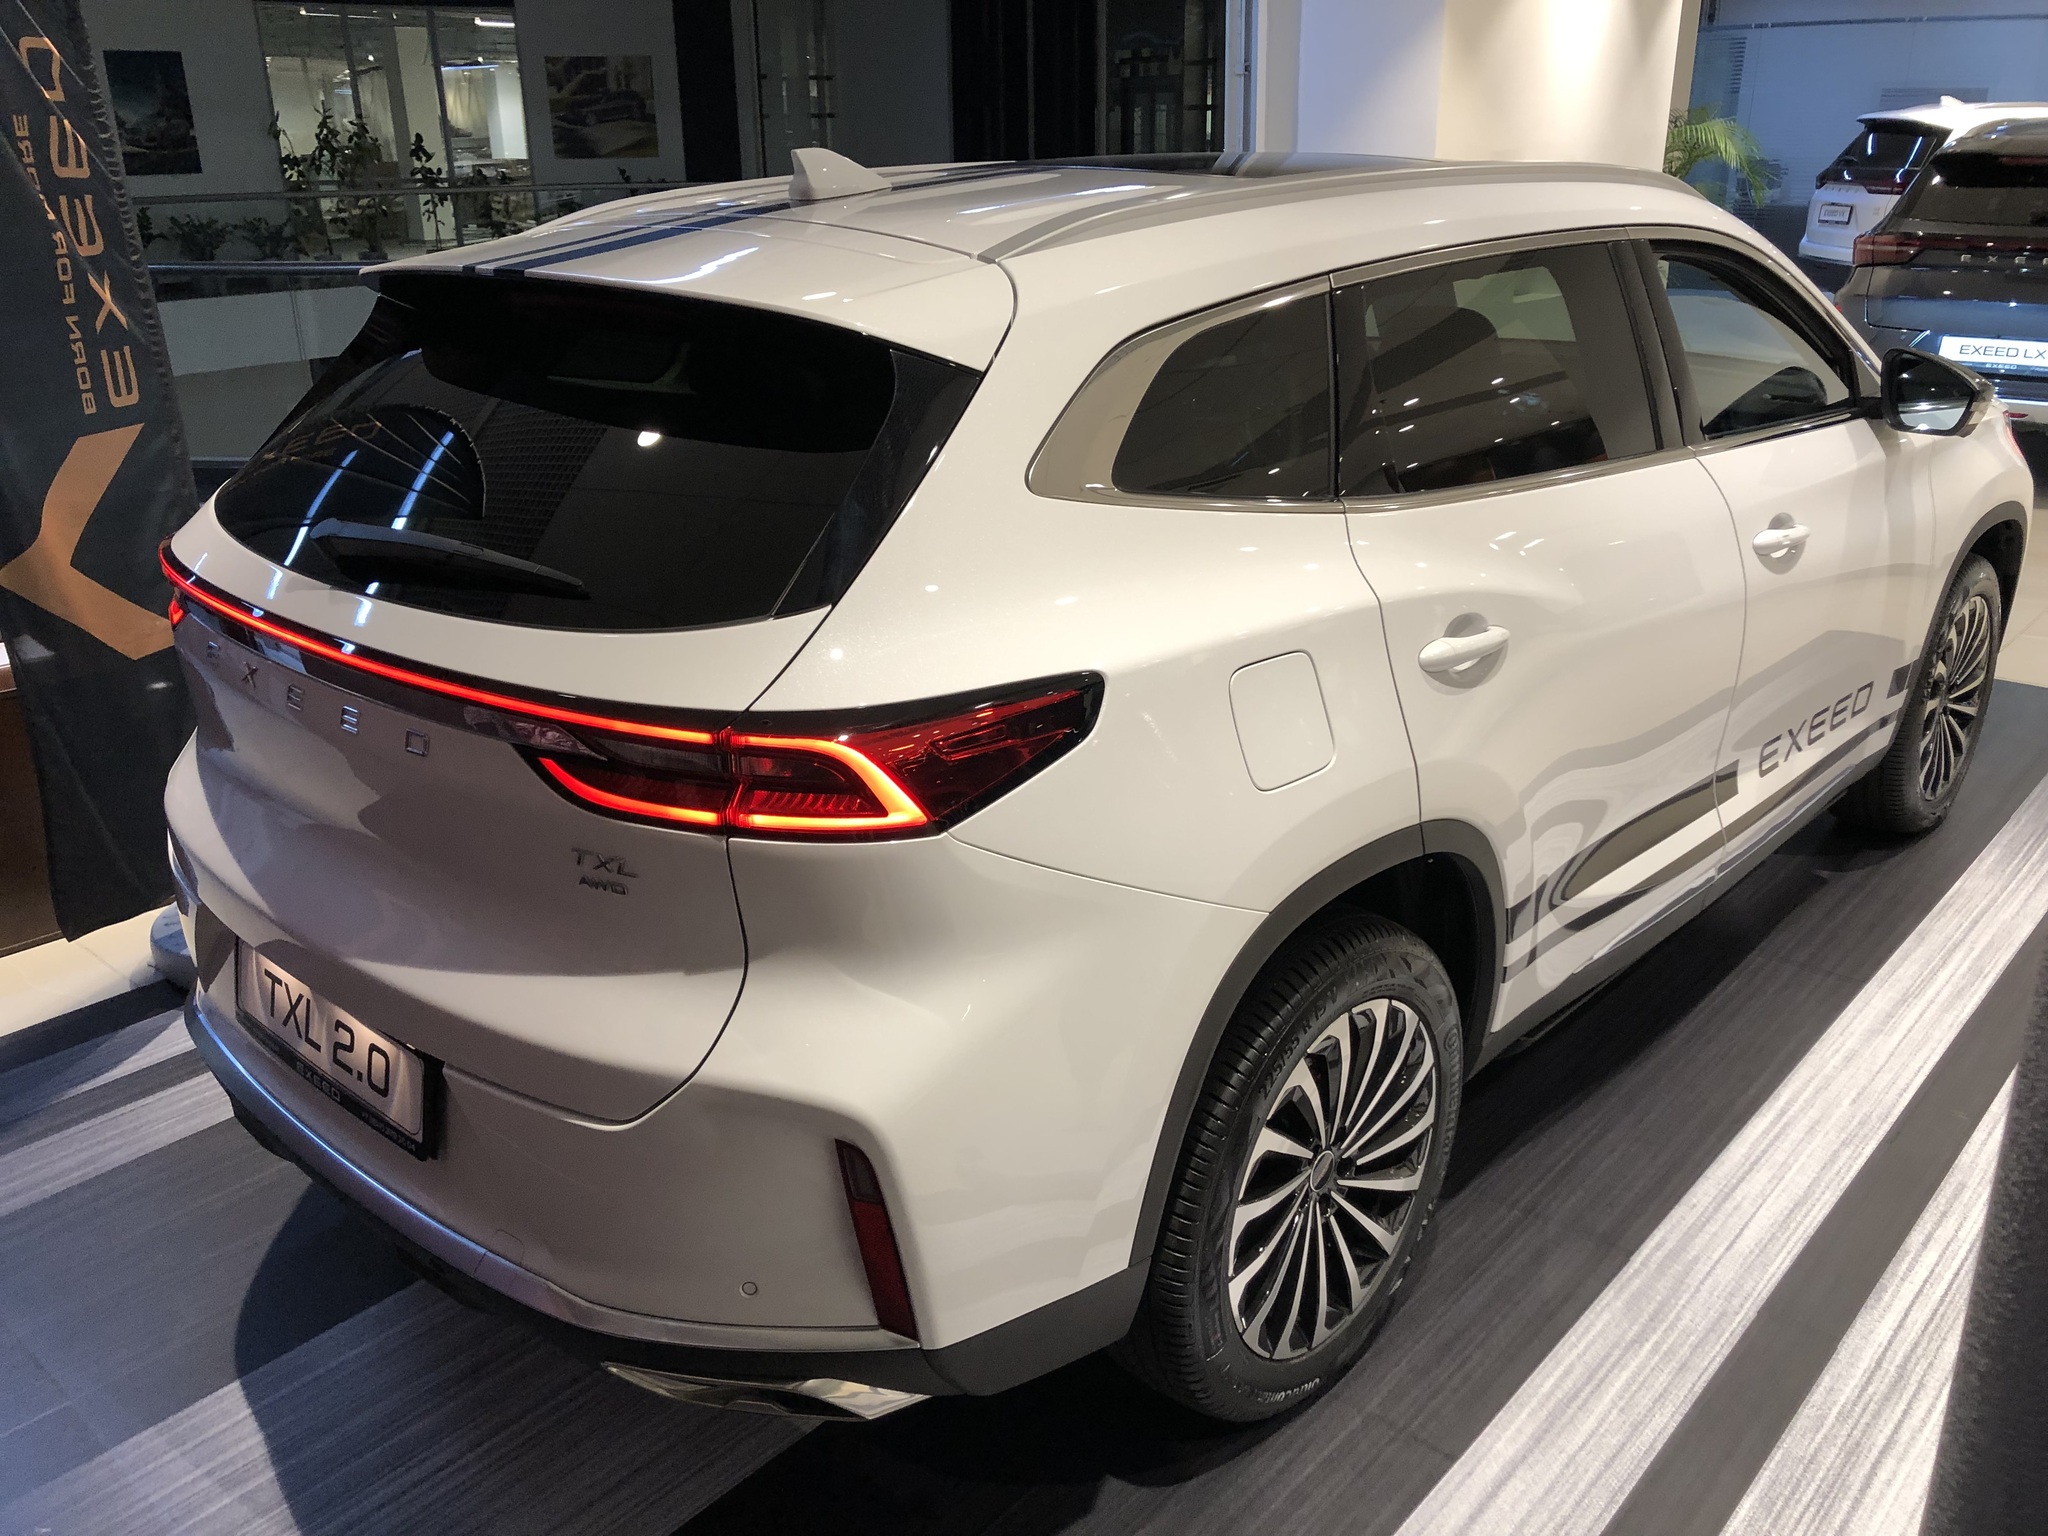 Exceed 2.0 sport